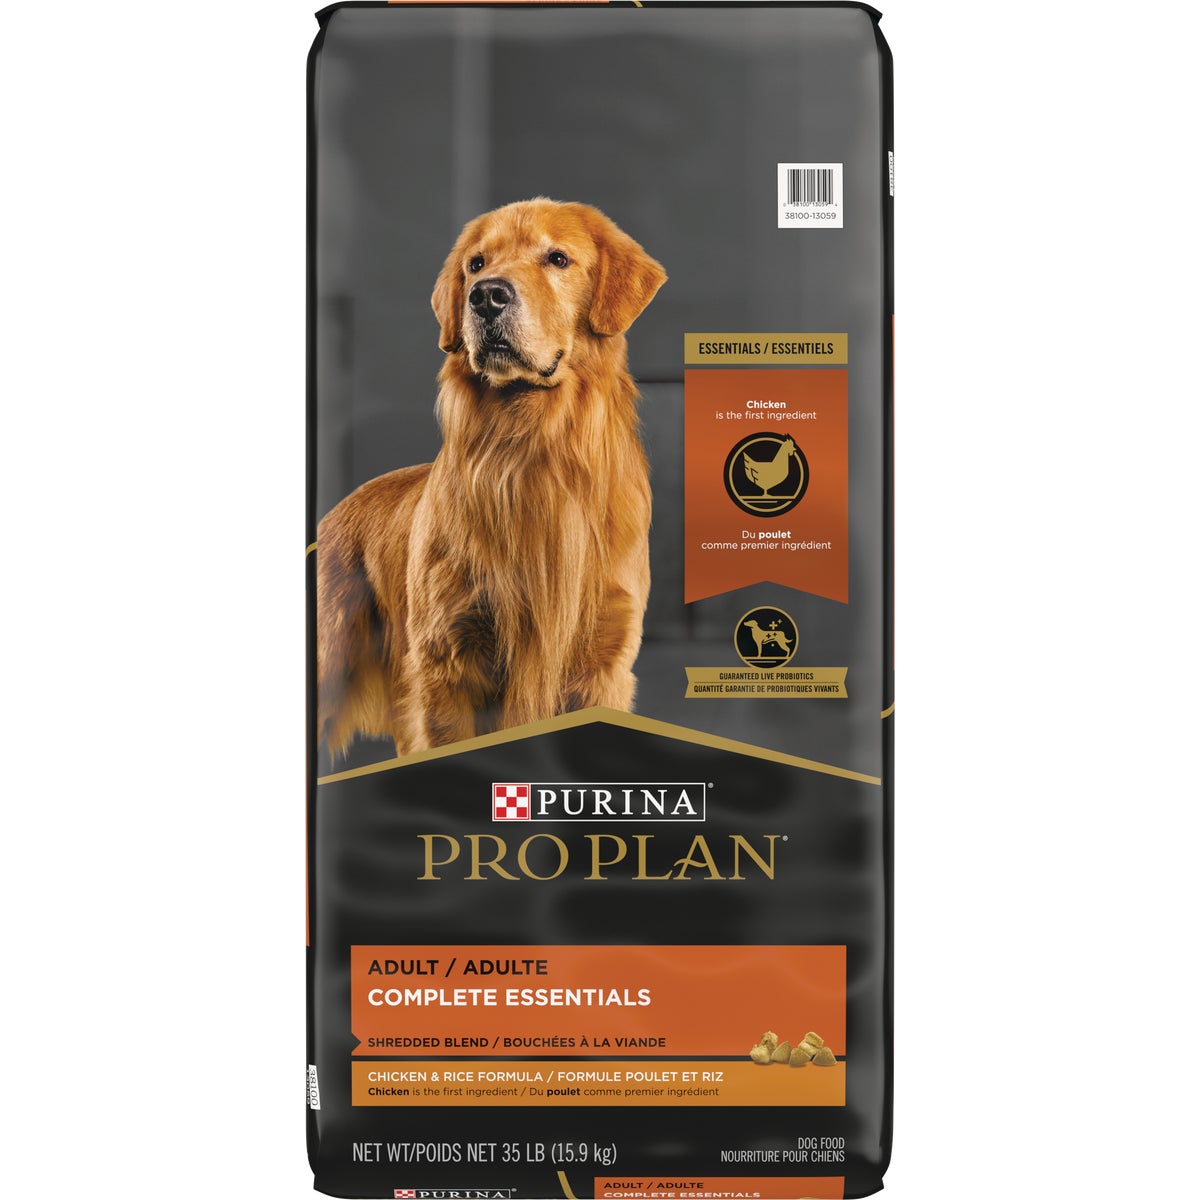 Pro Plan Purina 381435 Purina Pro Plan Shredded Blend 35 Lb. Chicken & Rice Flavor Adult Dry Dog Food 381435